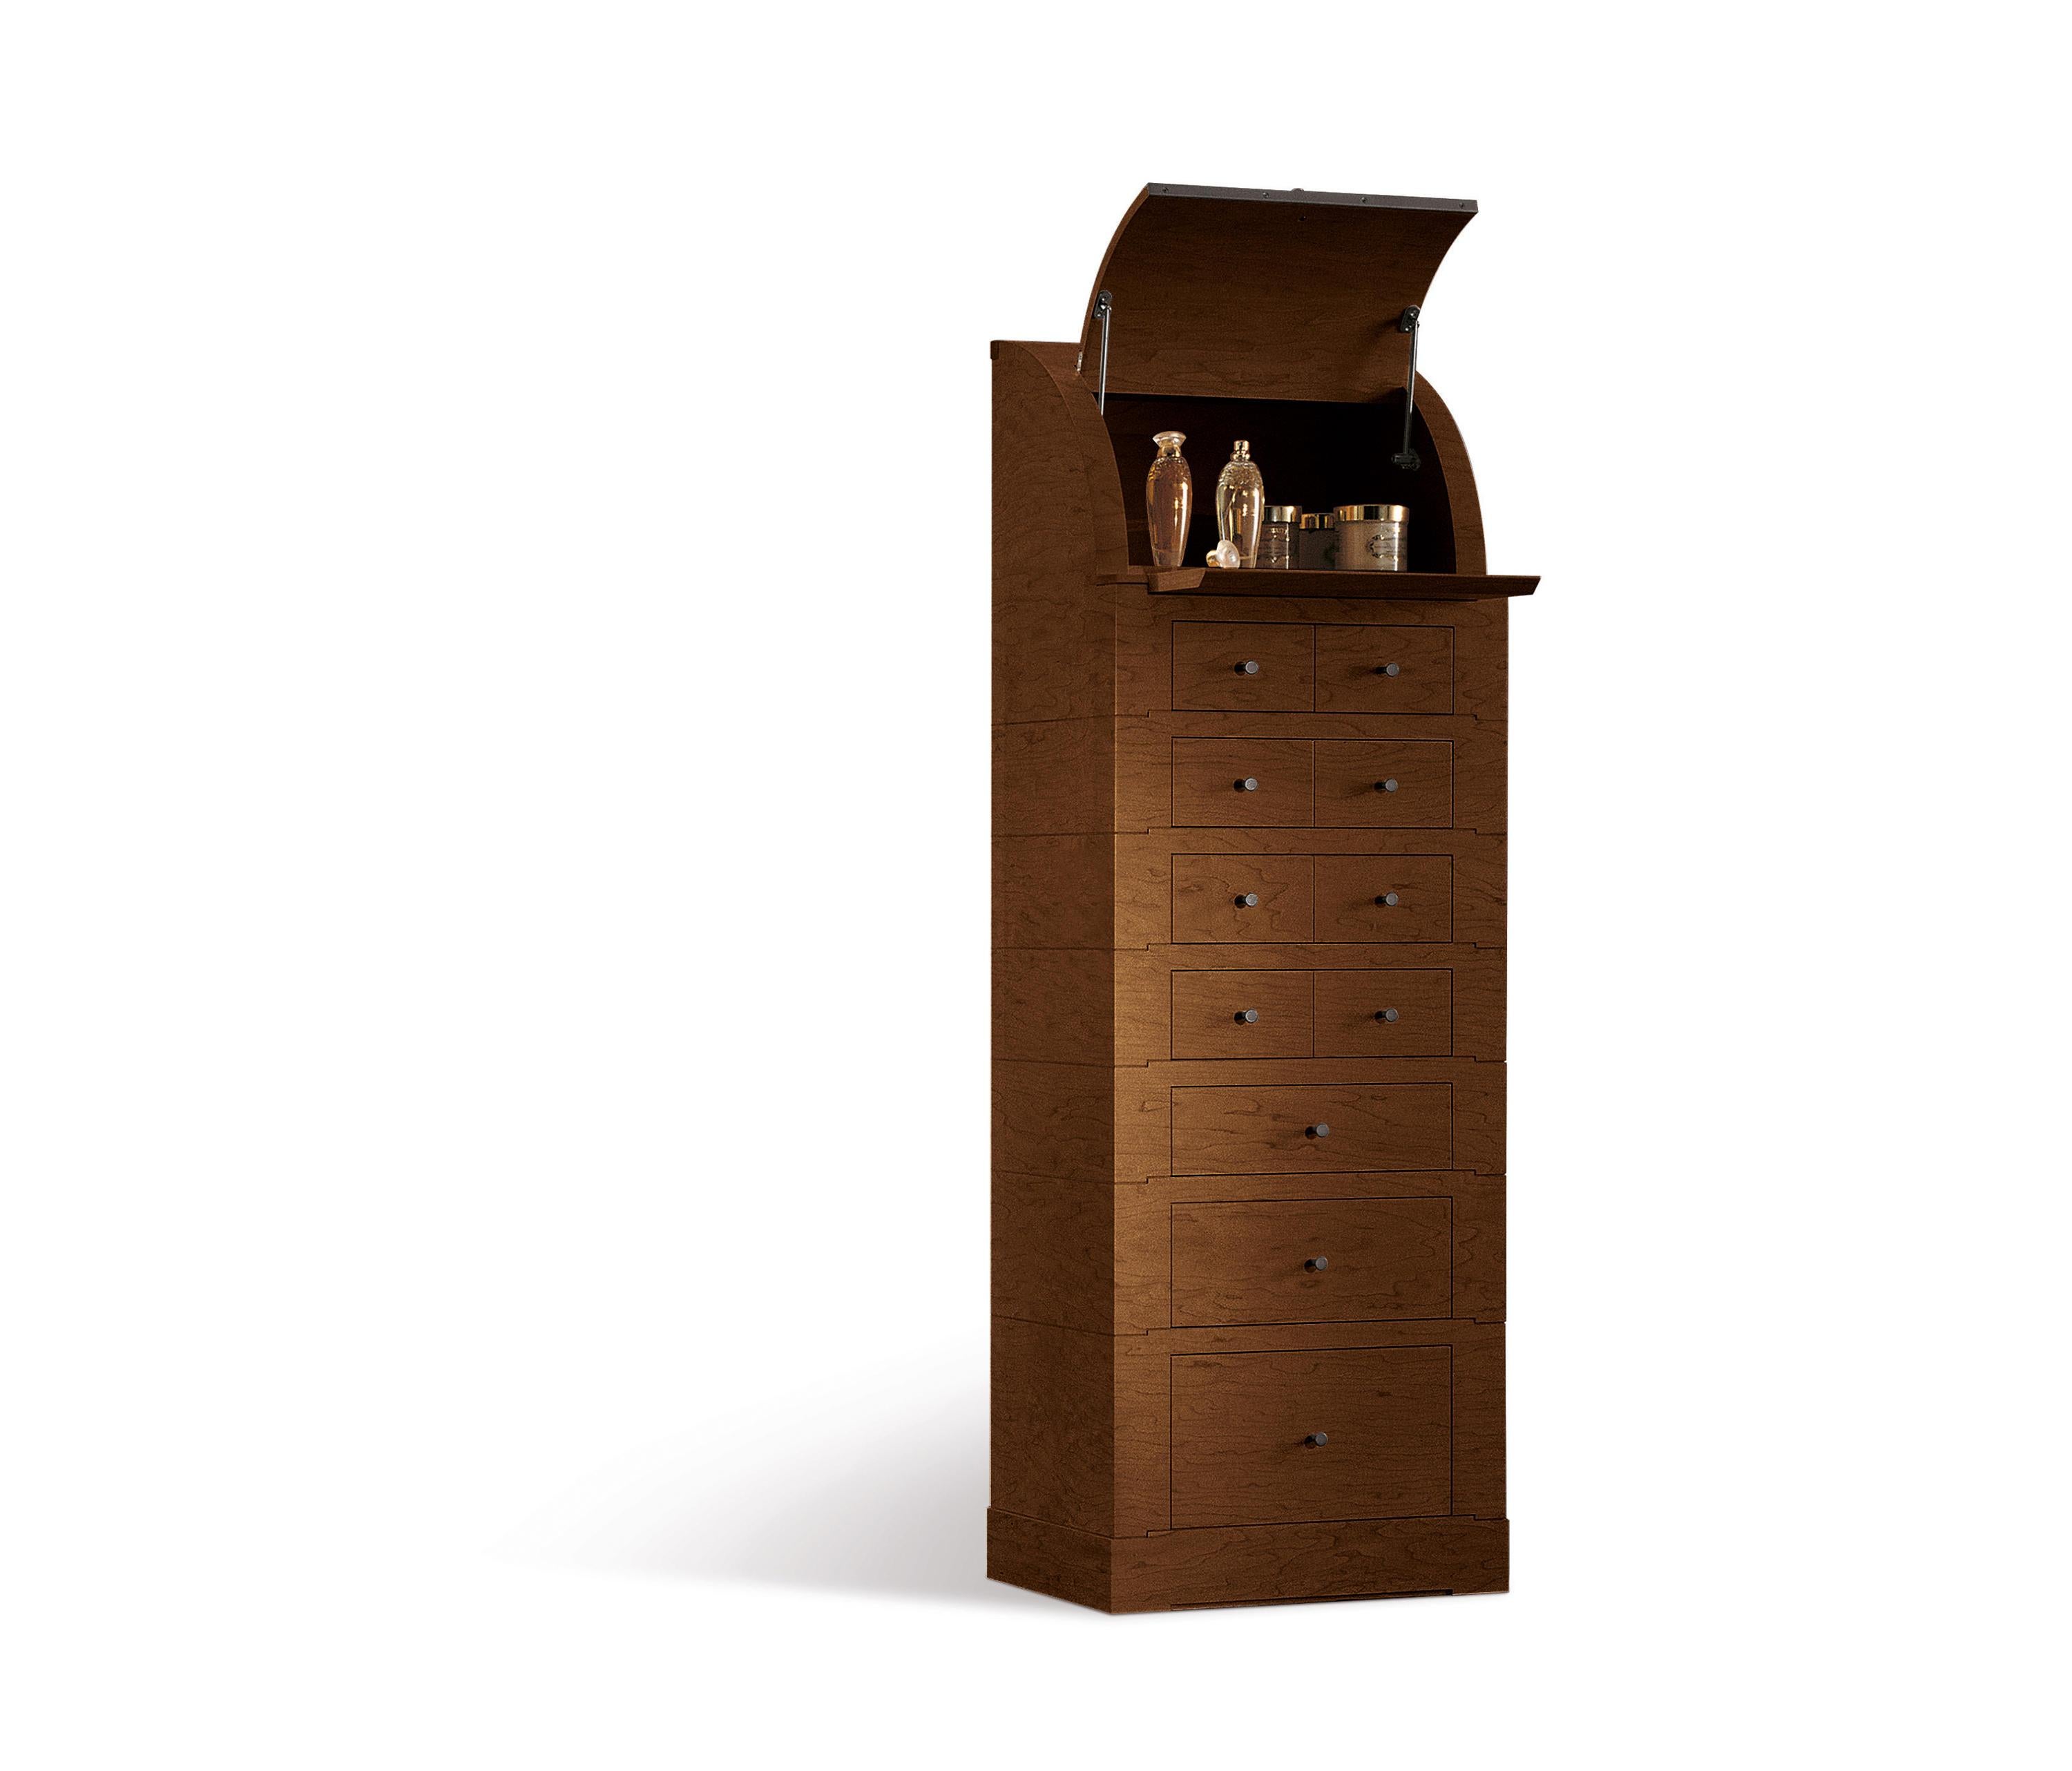 Tall chest of drawers with the plywood frame in walnut Canaletto wood veneer. It is equipped with eleven drawers, an upper compartment with a flap door and a removable shelf. The handles are in metal painted in a bronze color.
A chest of drawers